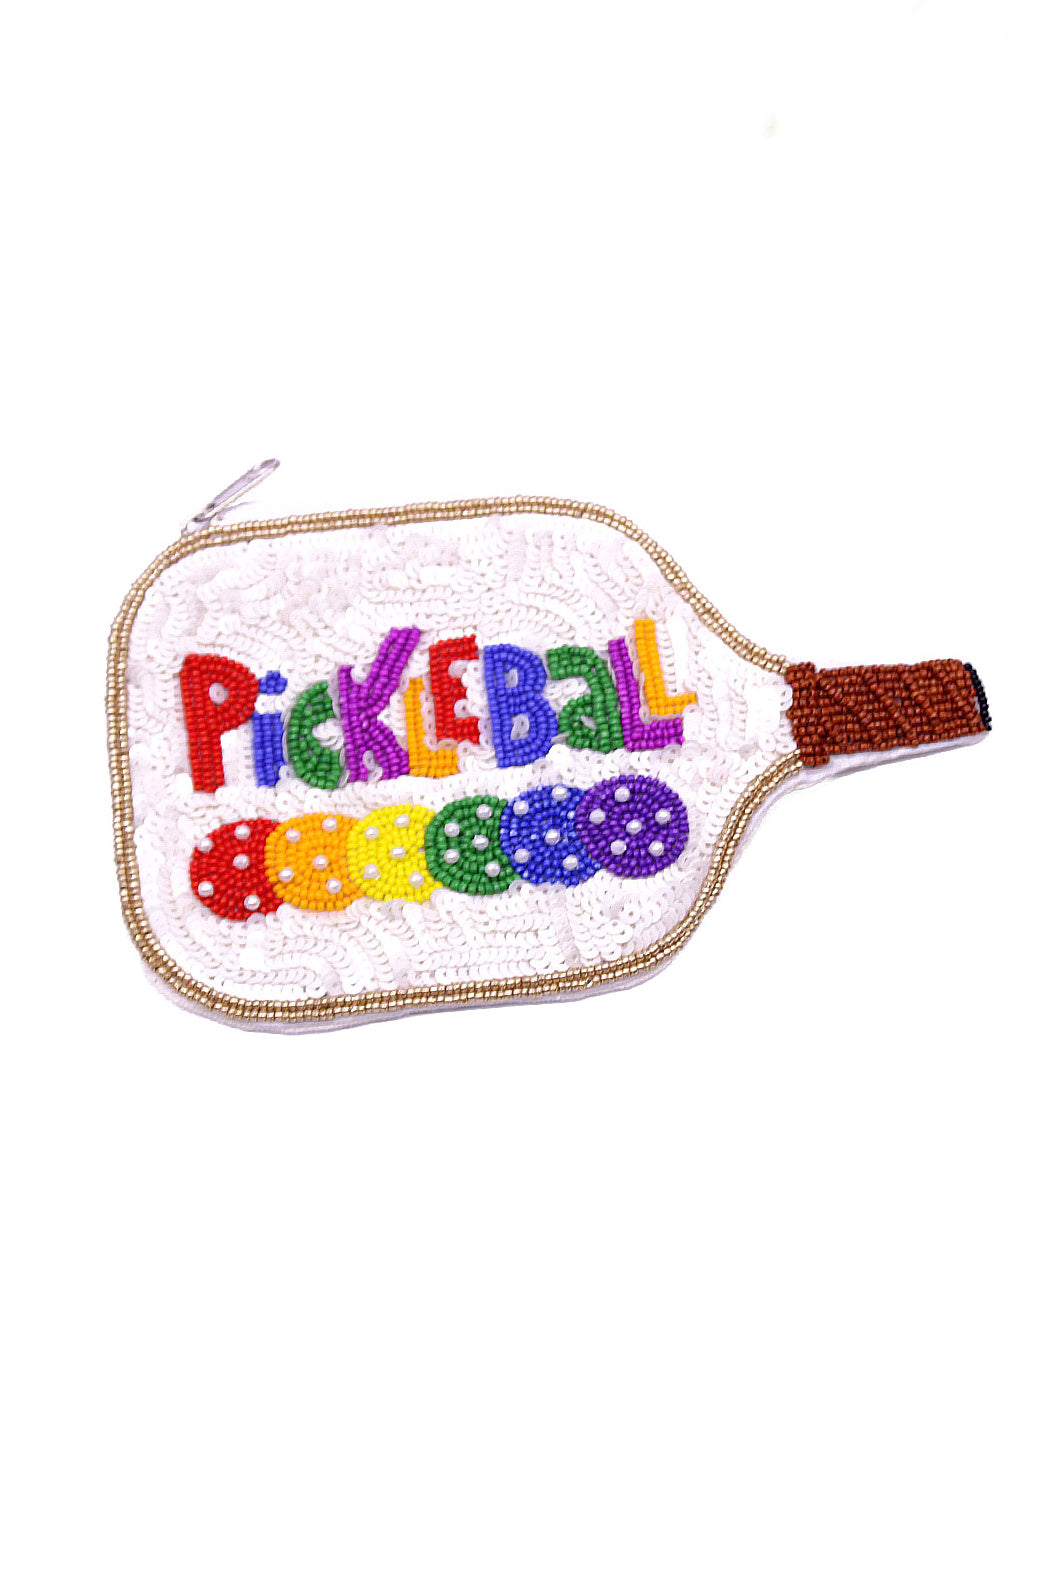 Pickleball Paddle Beaded Pouch